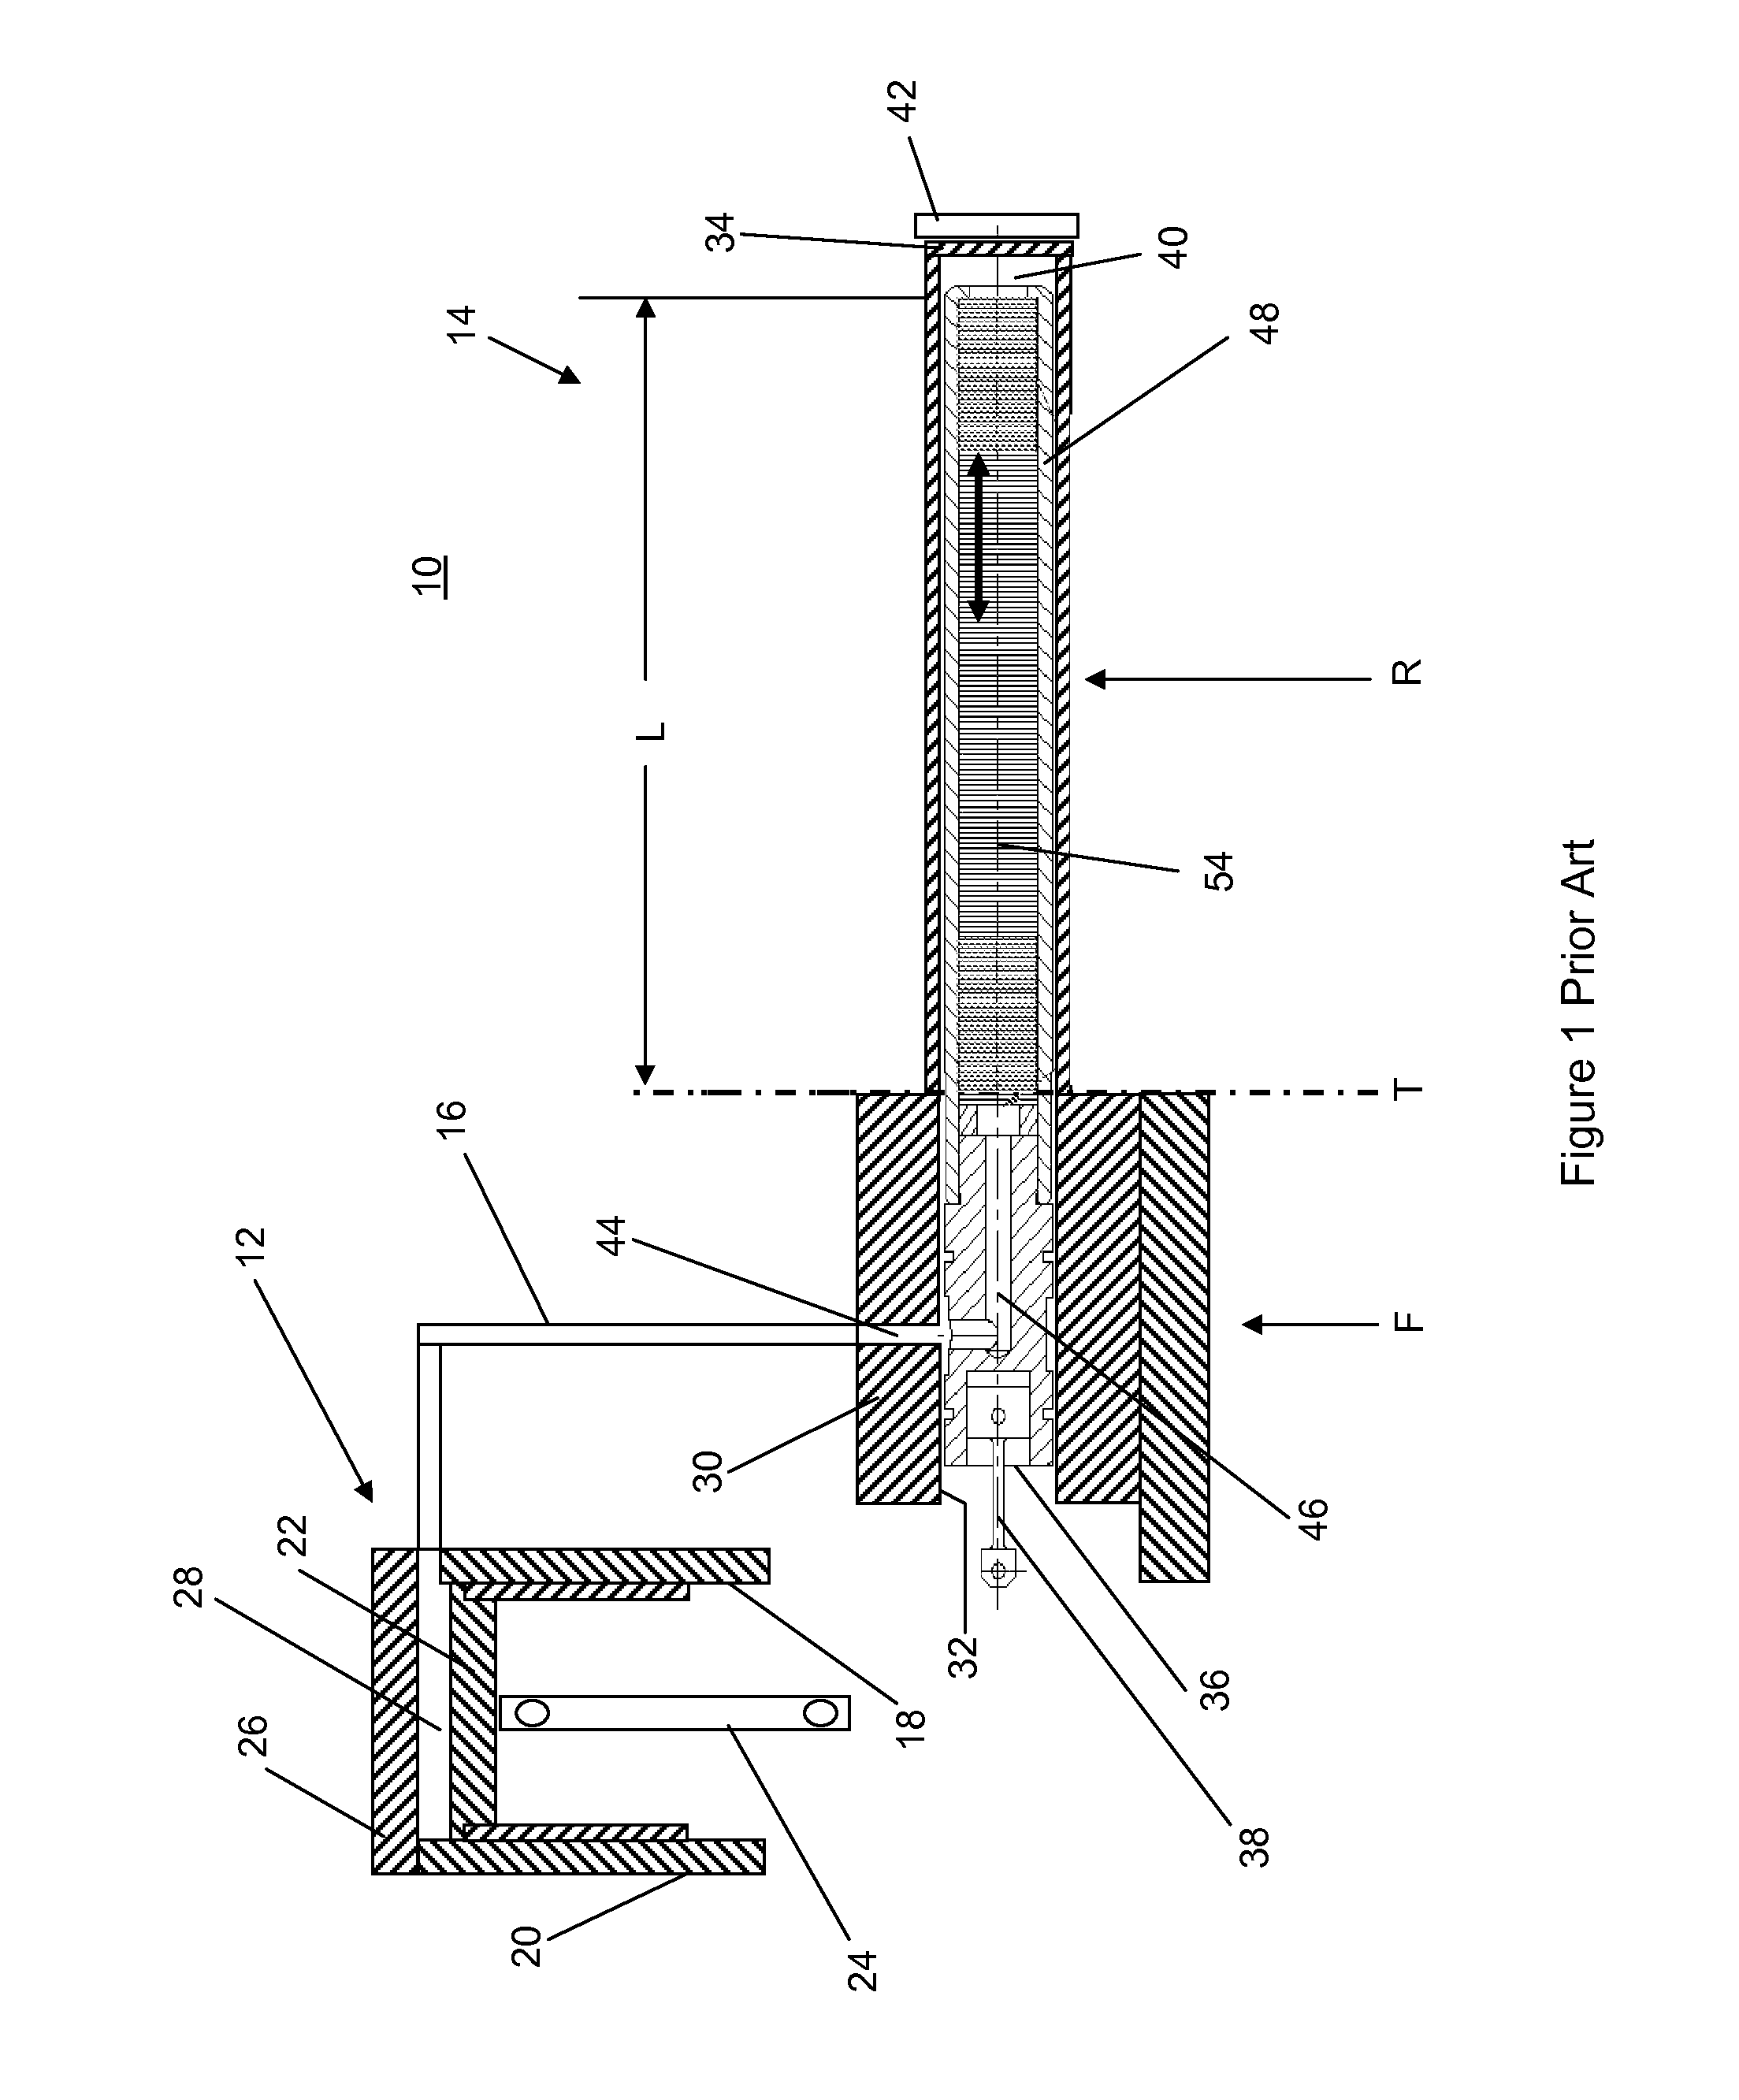 Miniaturized gas refrigeration device with two or more thermal regenerator sections